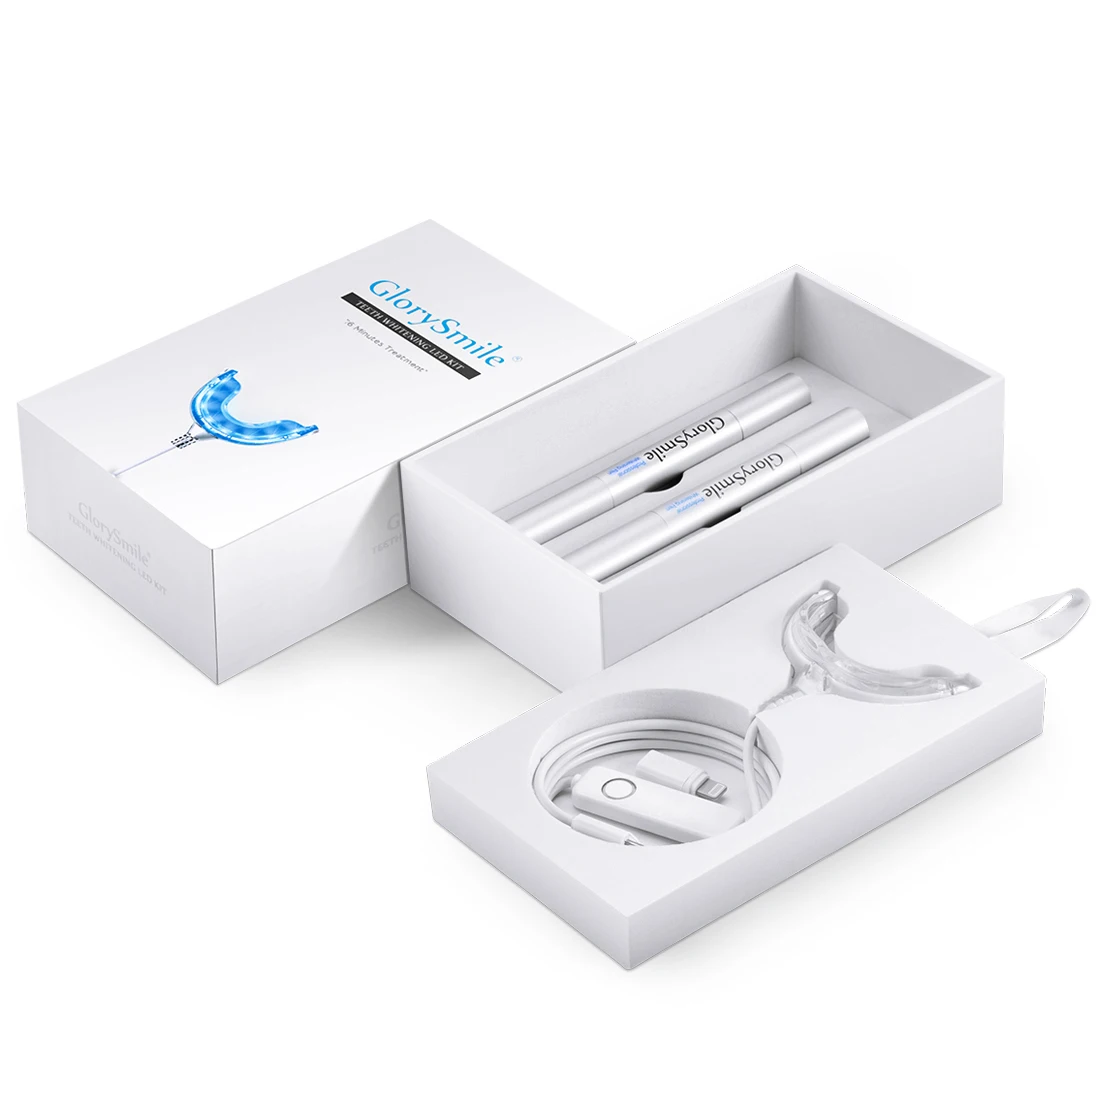 

Wholesale Cheapest CE Certified Home Travel Professional Phone Connected Cold Blue Light Teeth Whitening Kit, White black